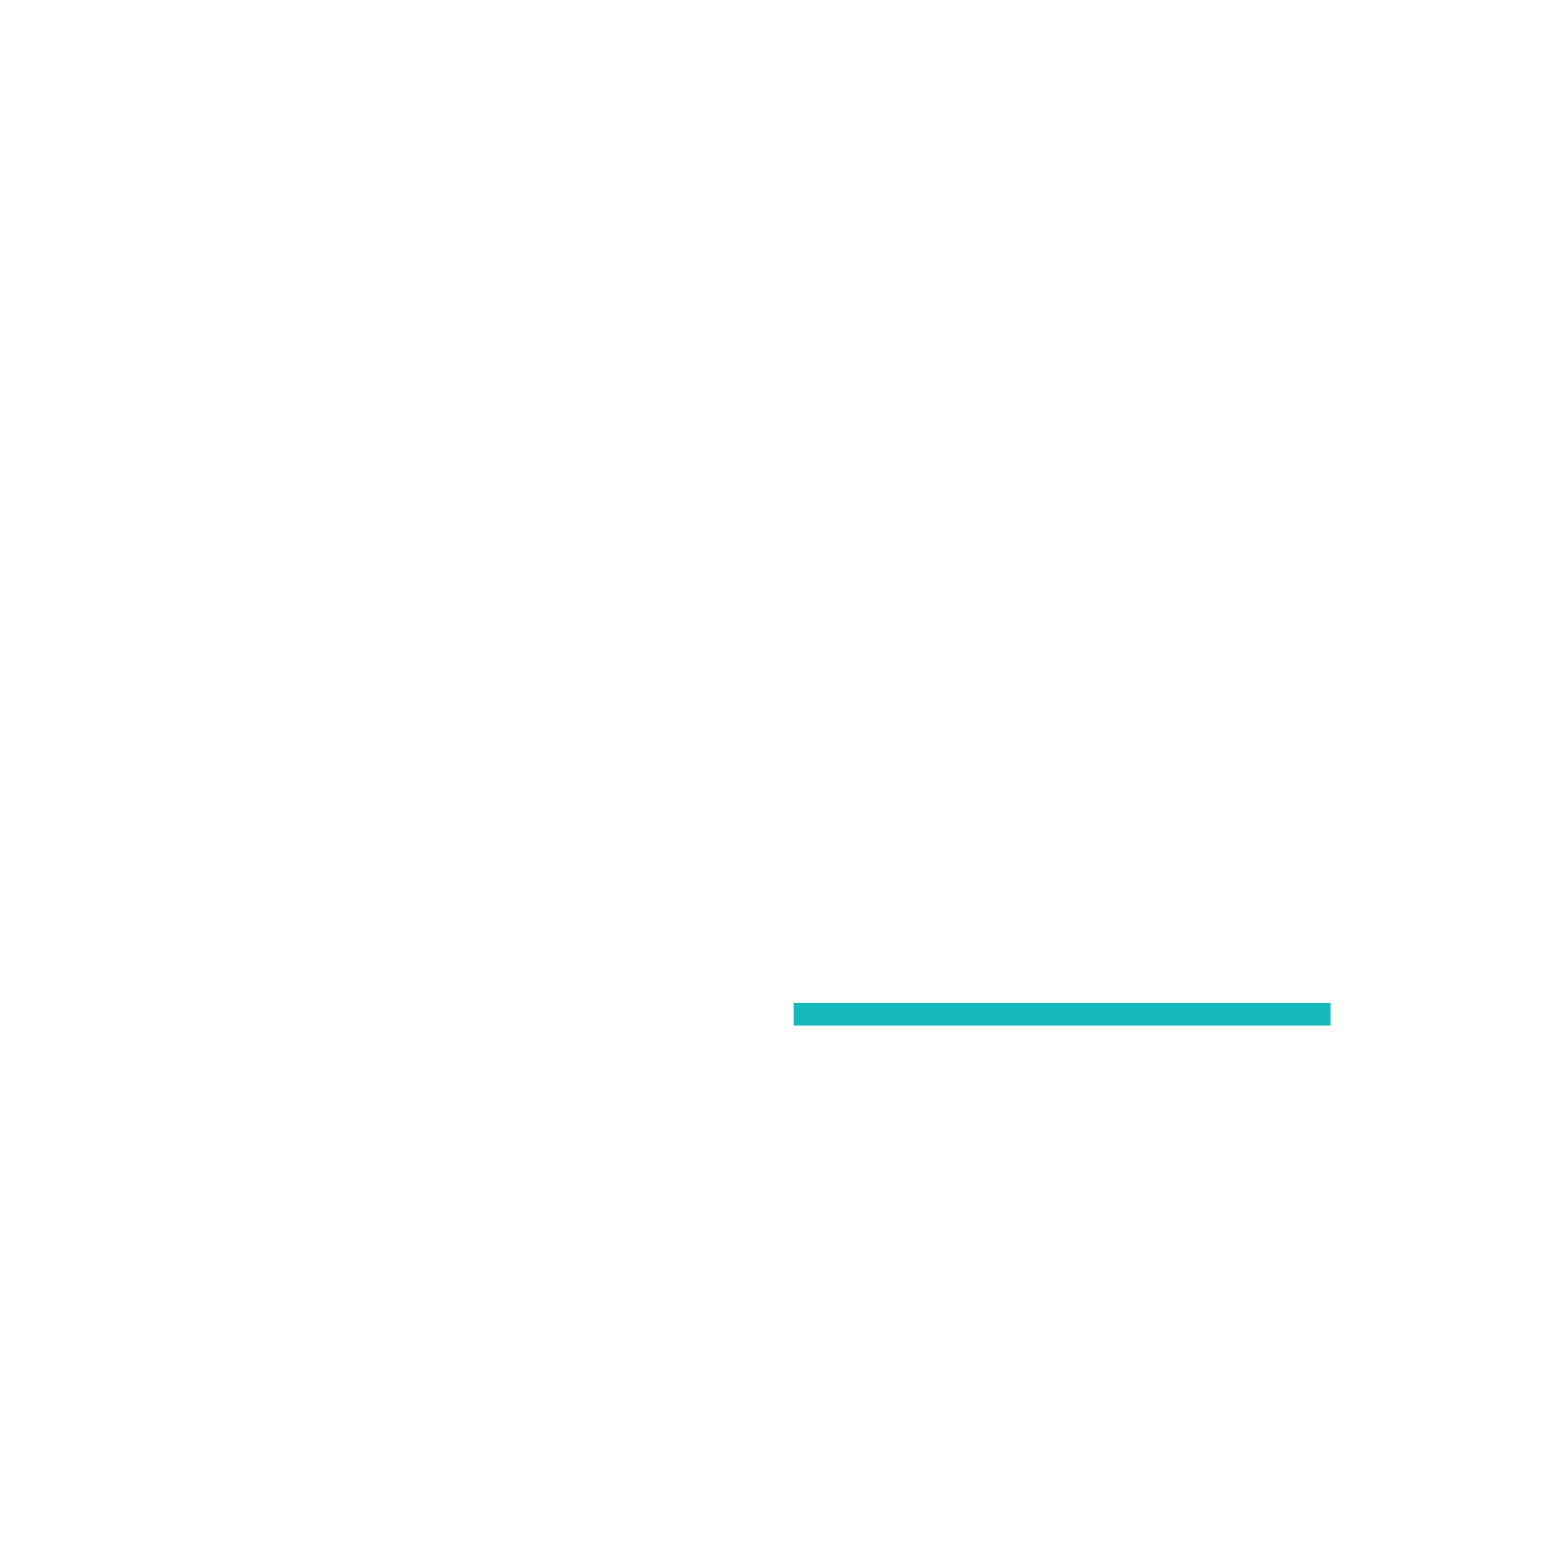 Yourl – Custom built websites from just £9.99 a month